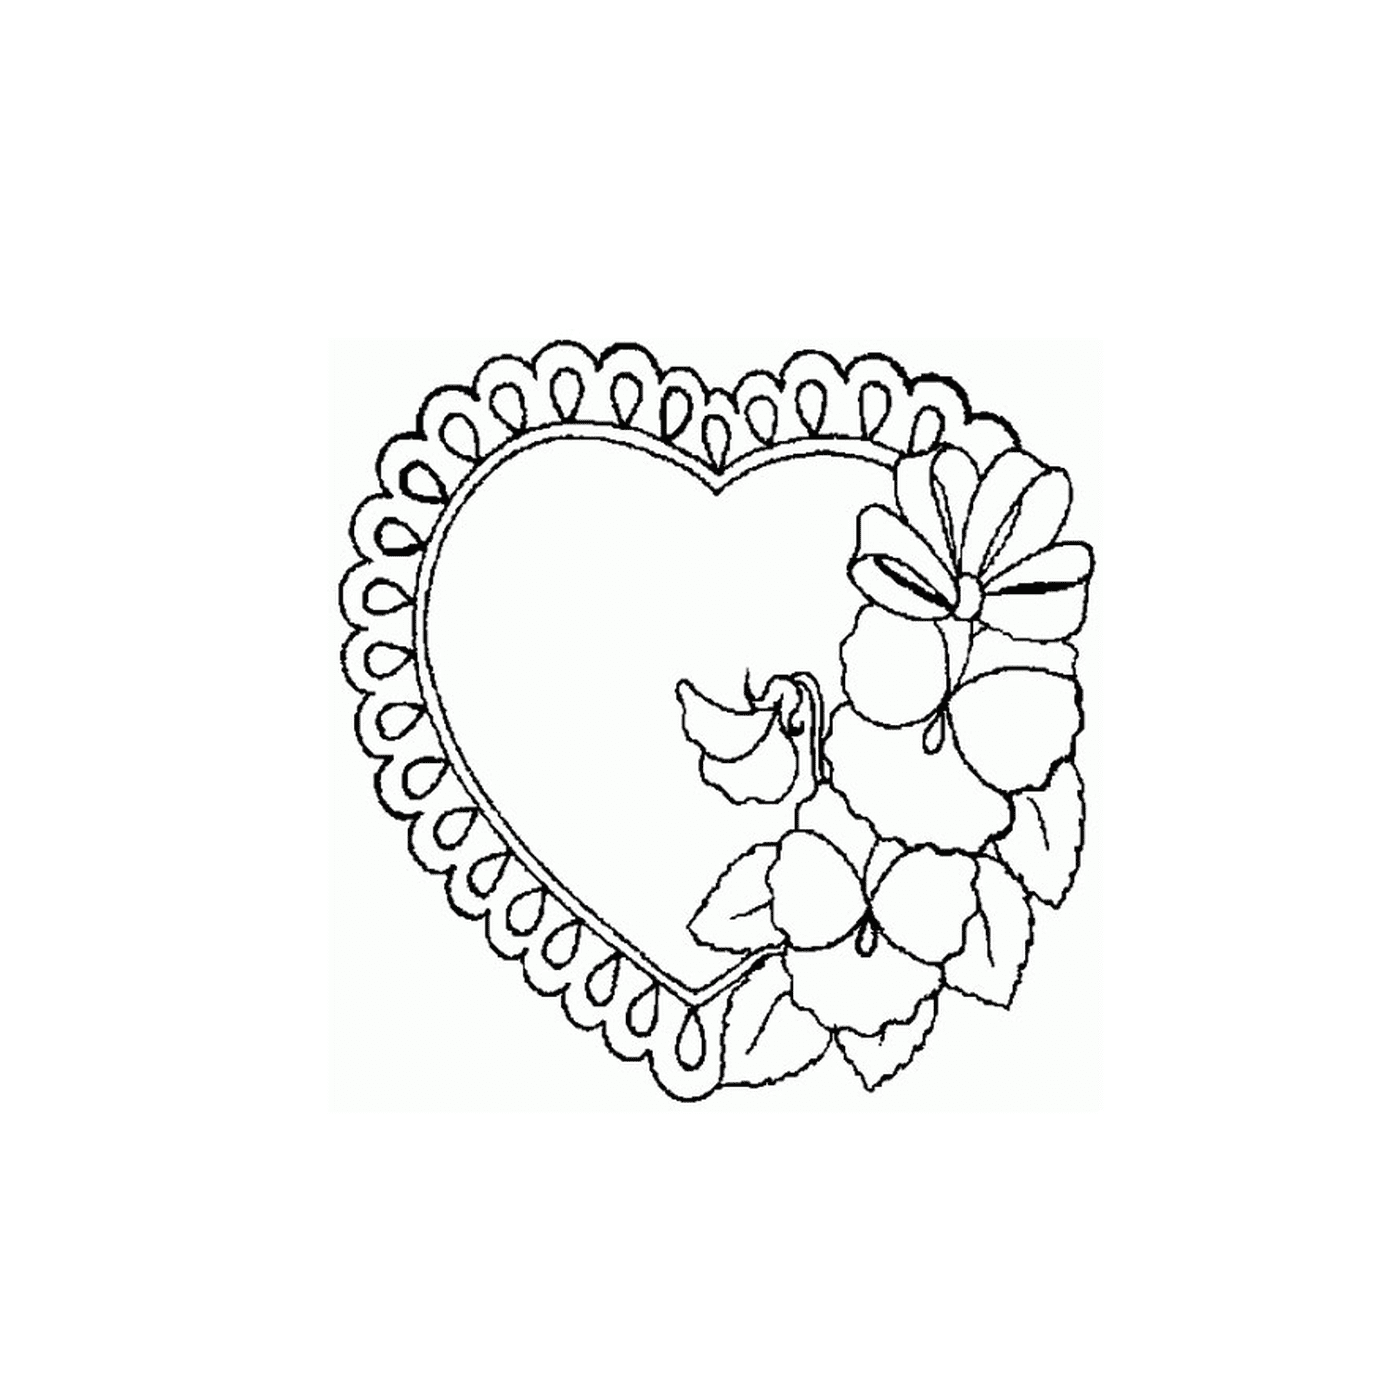  A heart with flowers 